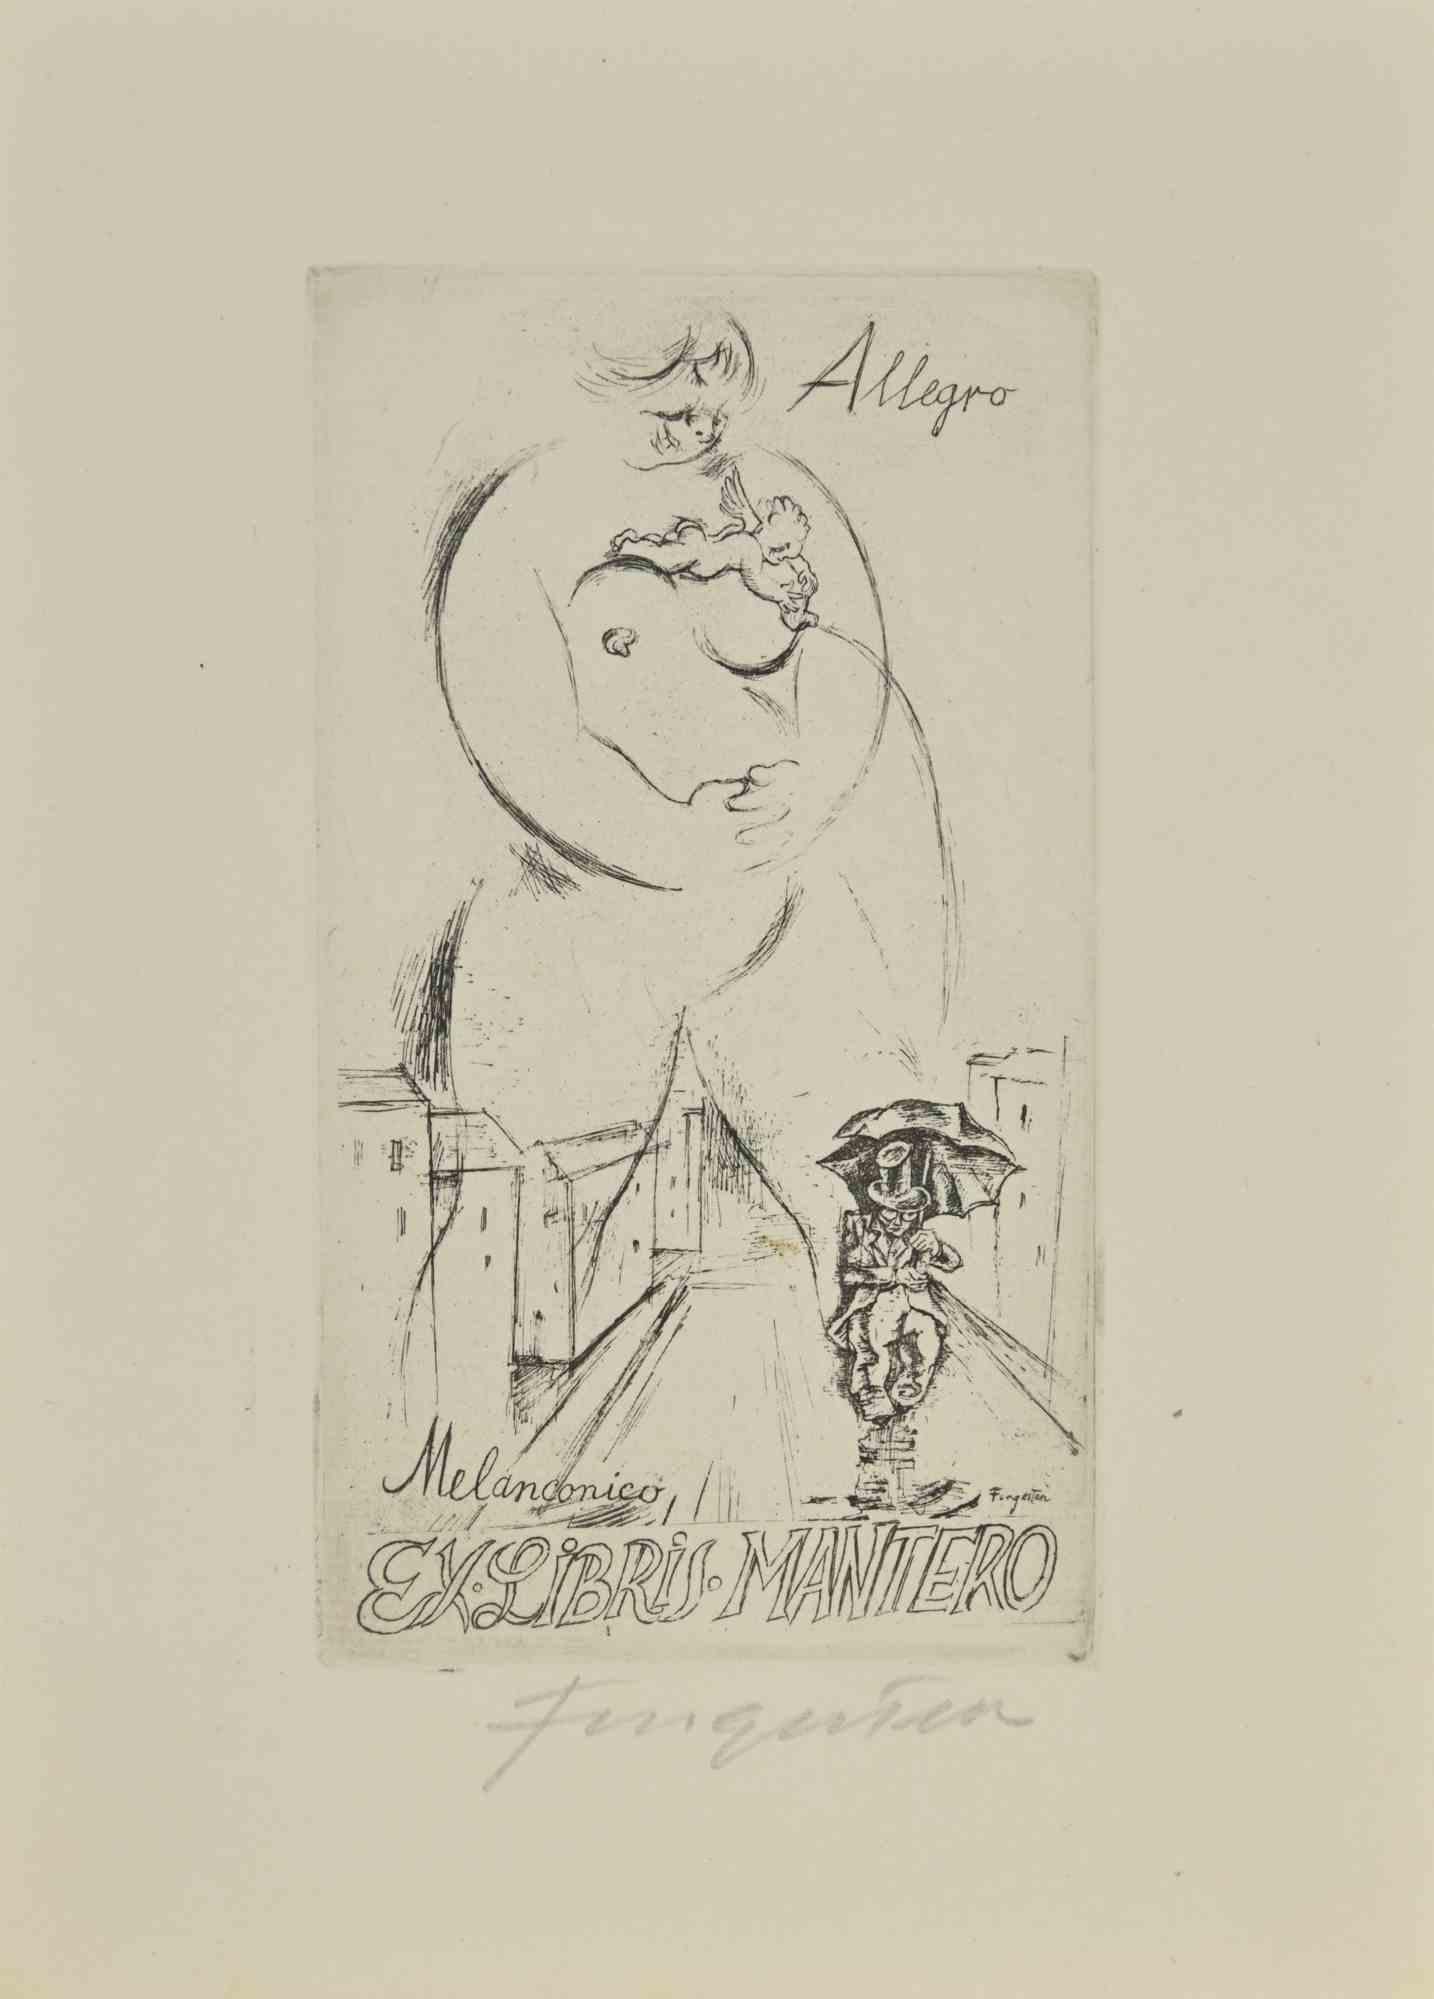 Ex Libris - Mantero - Melanconico-Allegro is an Etching print created by Michel Fingesten.

Hand Signed on the lower margin.

Good conditions.

Michel Fingesten (1884 - 1943) was a Czech painter and engraver of Jewish origin. He is considered one of